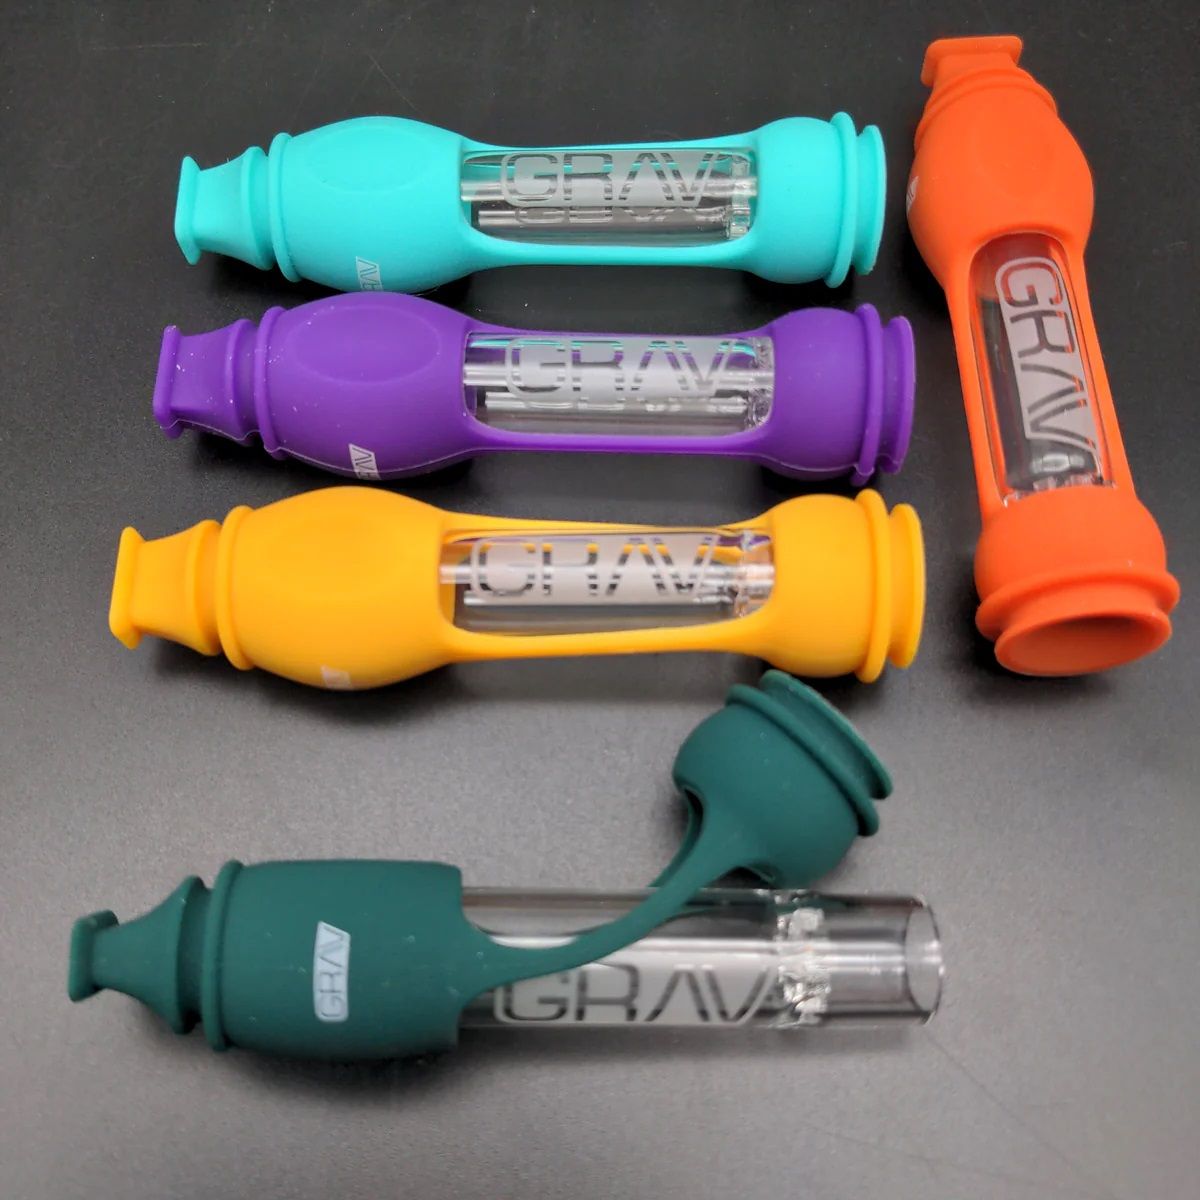 The 16mm GRAV® Octo-taster with Silicone Skin comes in assorted colors, offering both style and functionality. @Gravlabs headshop.com/collections/gr… #GRAV #Octotaster #SiliconeSkin #SmokingAccessory #Portable #Convenient #SmoothSmoking #Durable #HighQuality #AssortedColors